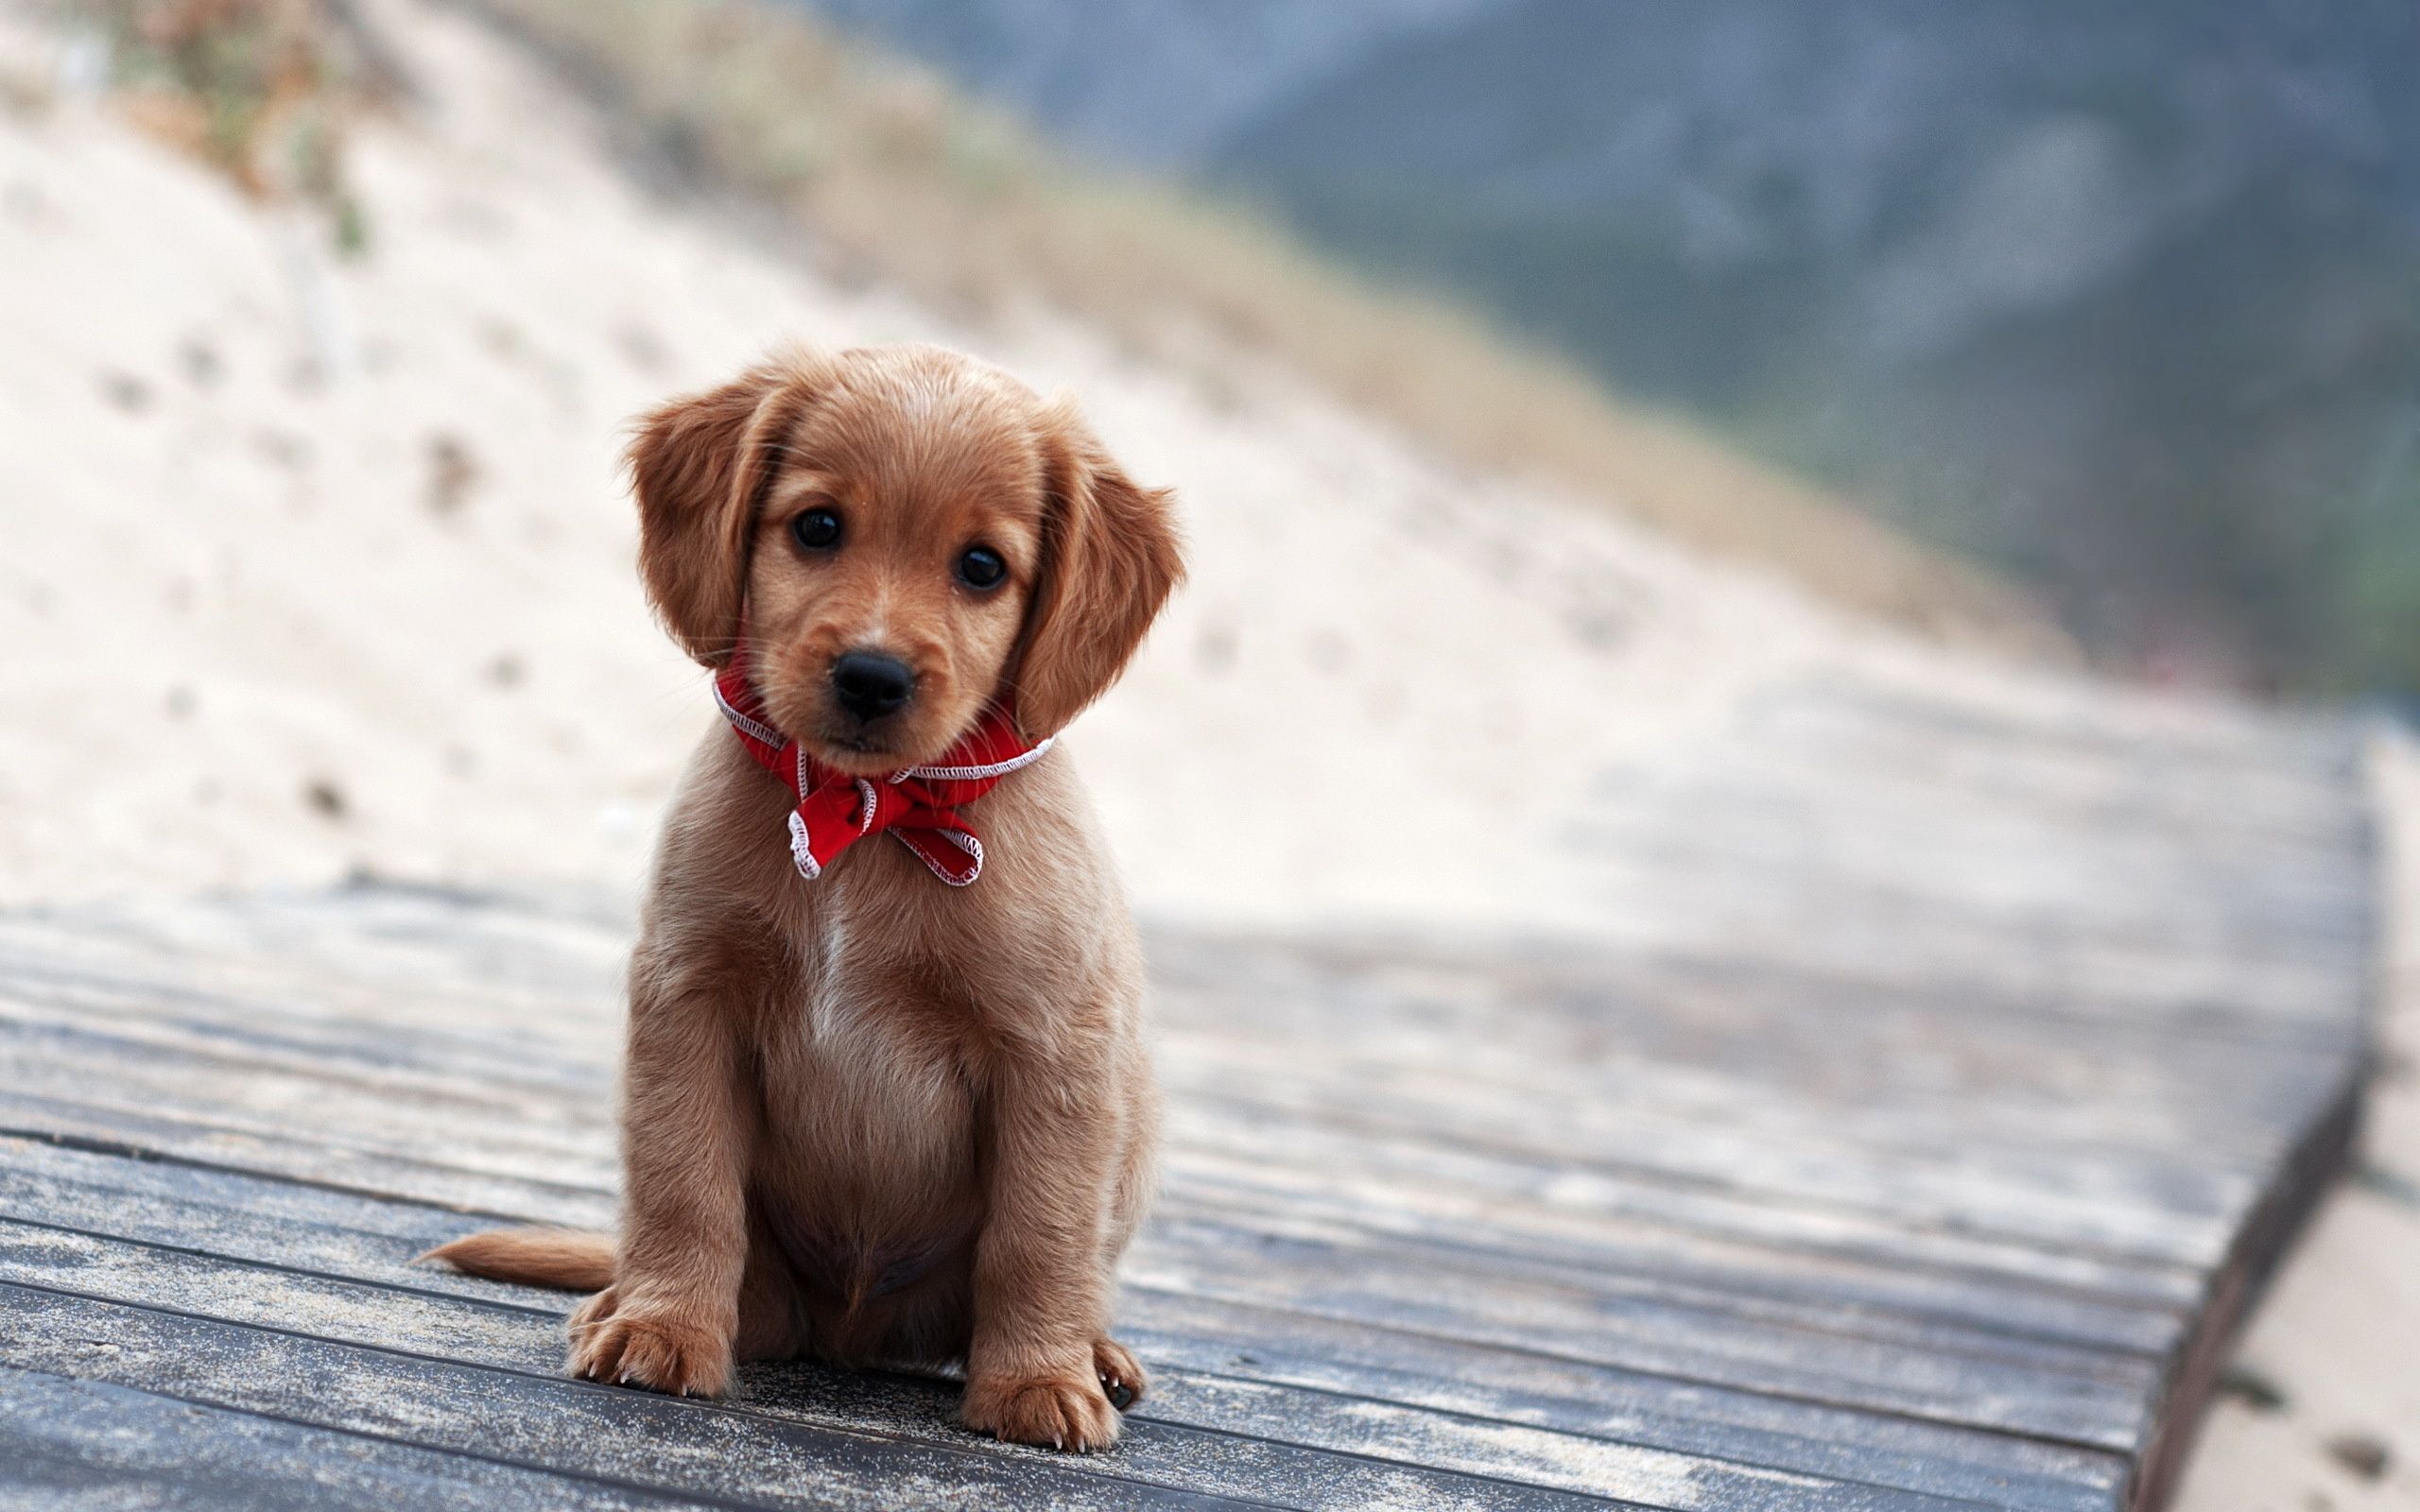 Cute Puppy Wallpapers Group (79+)